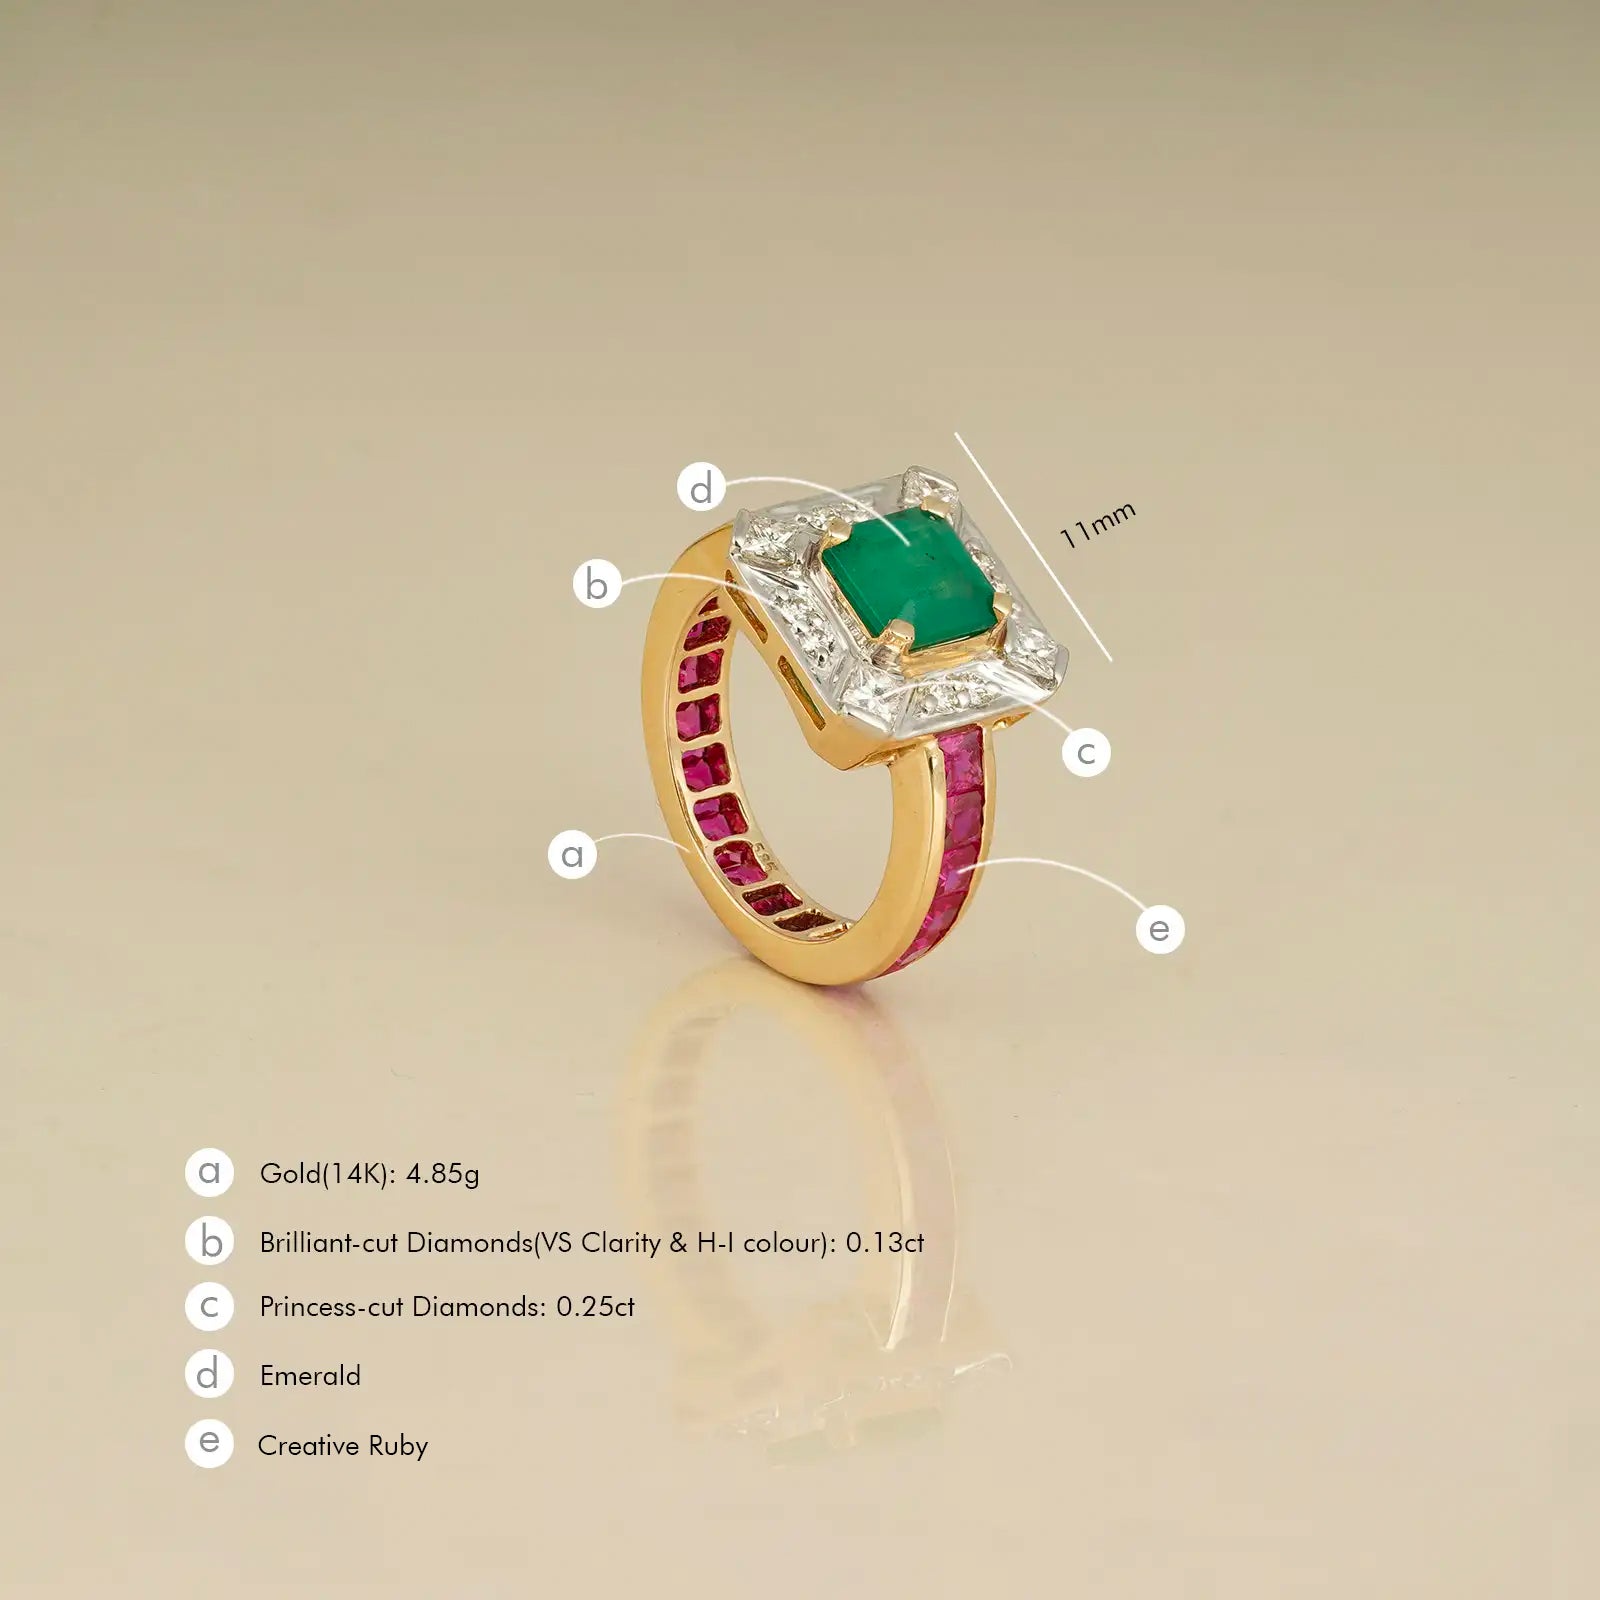 The gold ring oval jamindar | Grk jewellery works - YouTube